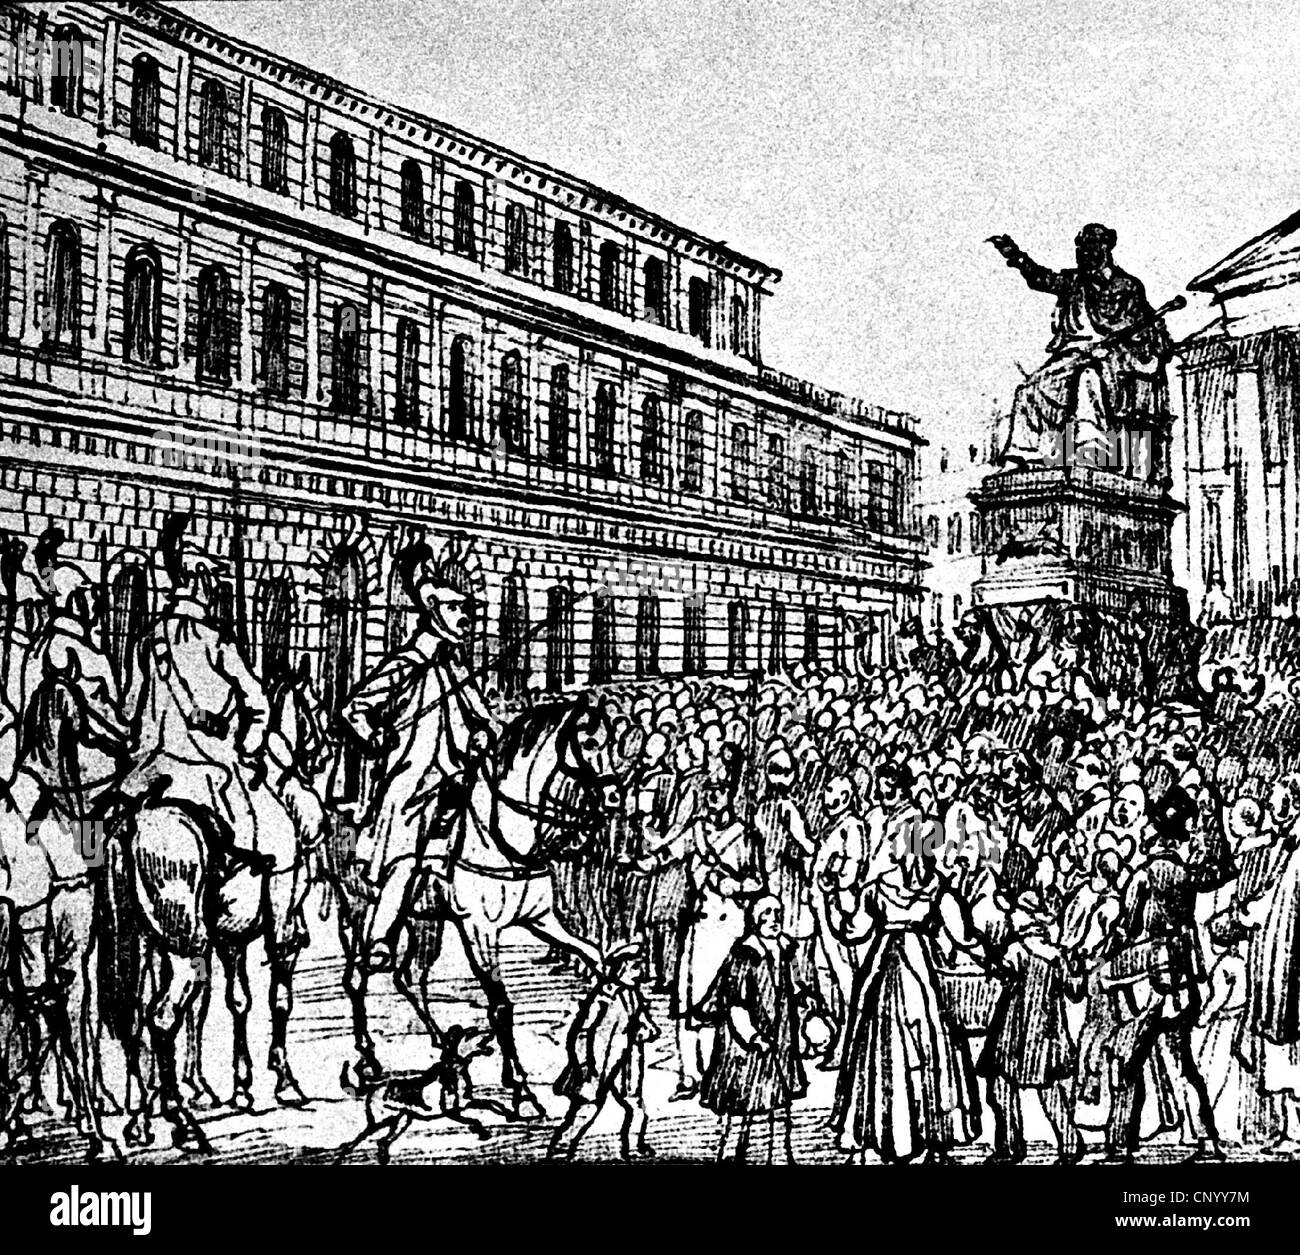 revolutions of 1848/1849, Bavaria, Munich, deputation of Munich citizens in front of the residence, Max Joseph Square, 10.2.1848, contemporary drawing, military, cavalry, cavalries, German revolution, soldier, soldiers, insurgency, rebellion, insurgencies, revolts, rebellions, in revolt, 19th century, historic, historical, crowd, crowds, crowds of people, Southern Germany, the South of Germany, Germany, Central Europe, Europe, uprising, Additional-Rights-Clearences-Not Available Stock Photo